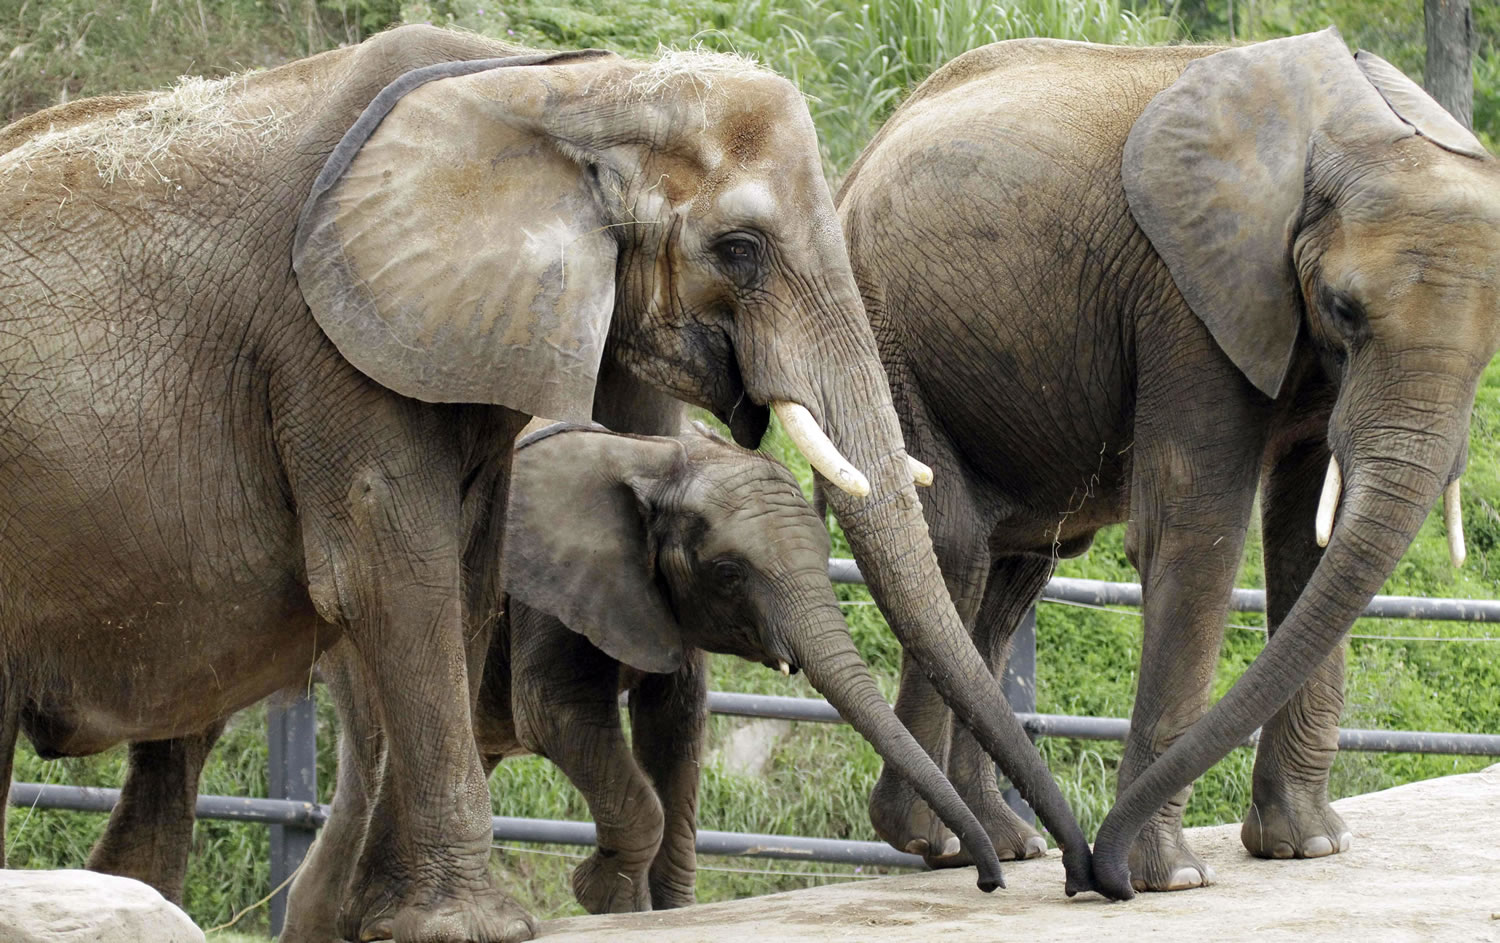 Moja, left, a 28-year-old African elephant, and her daughters, Zuri, 3, and Victoria, 11, all born at the Pittsburgh Zoo